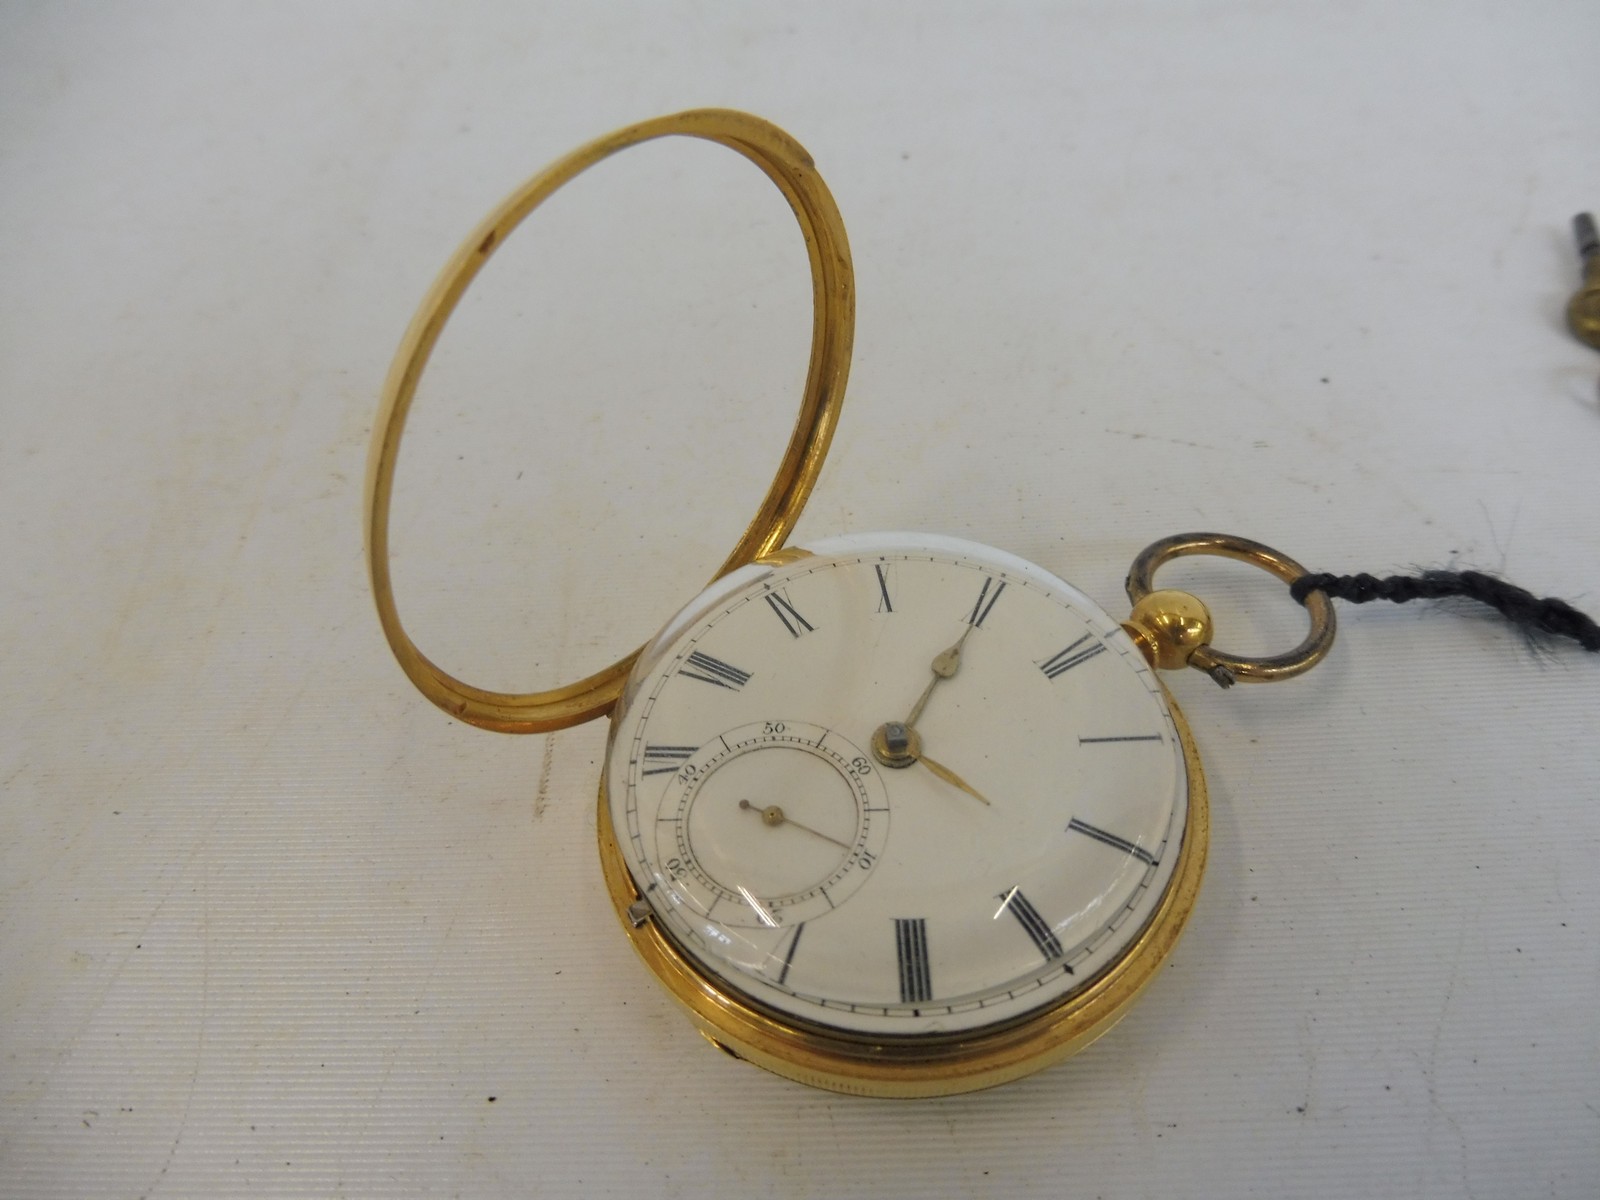 A gold pocket watch (possibly 18ct), with white enamel dial and subsidiary dial, complete with two